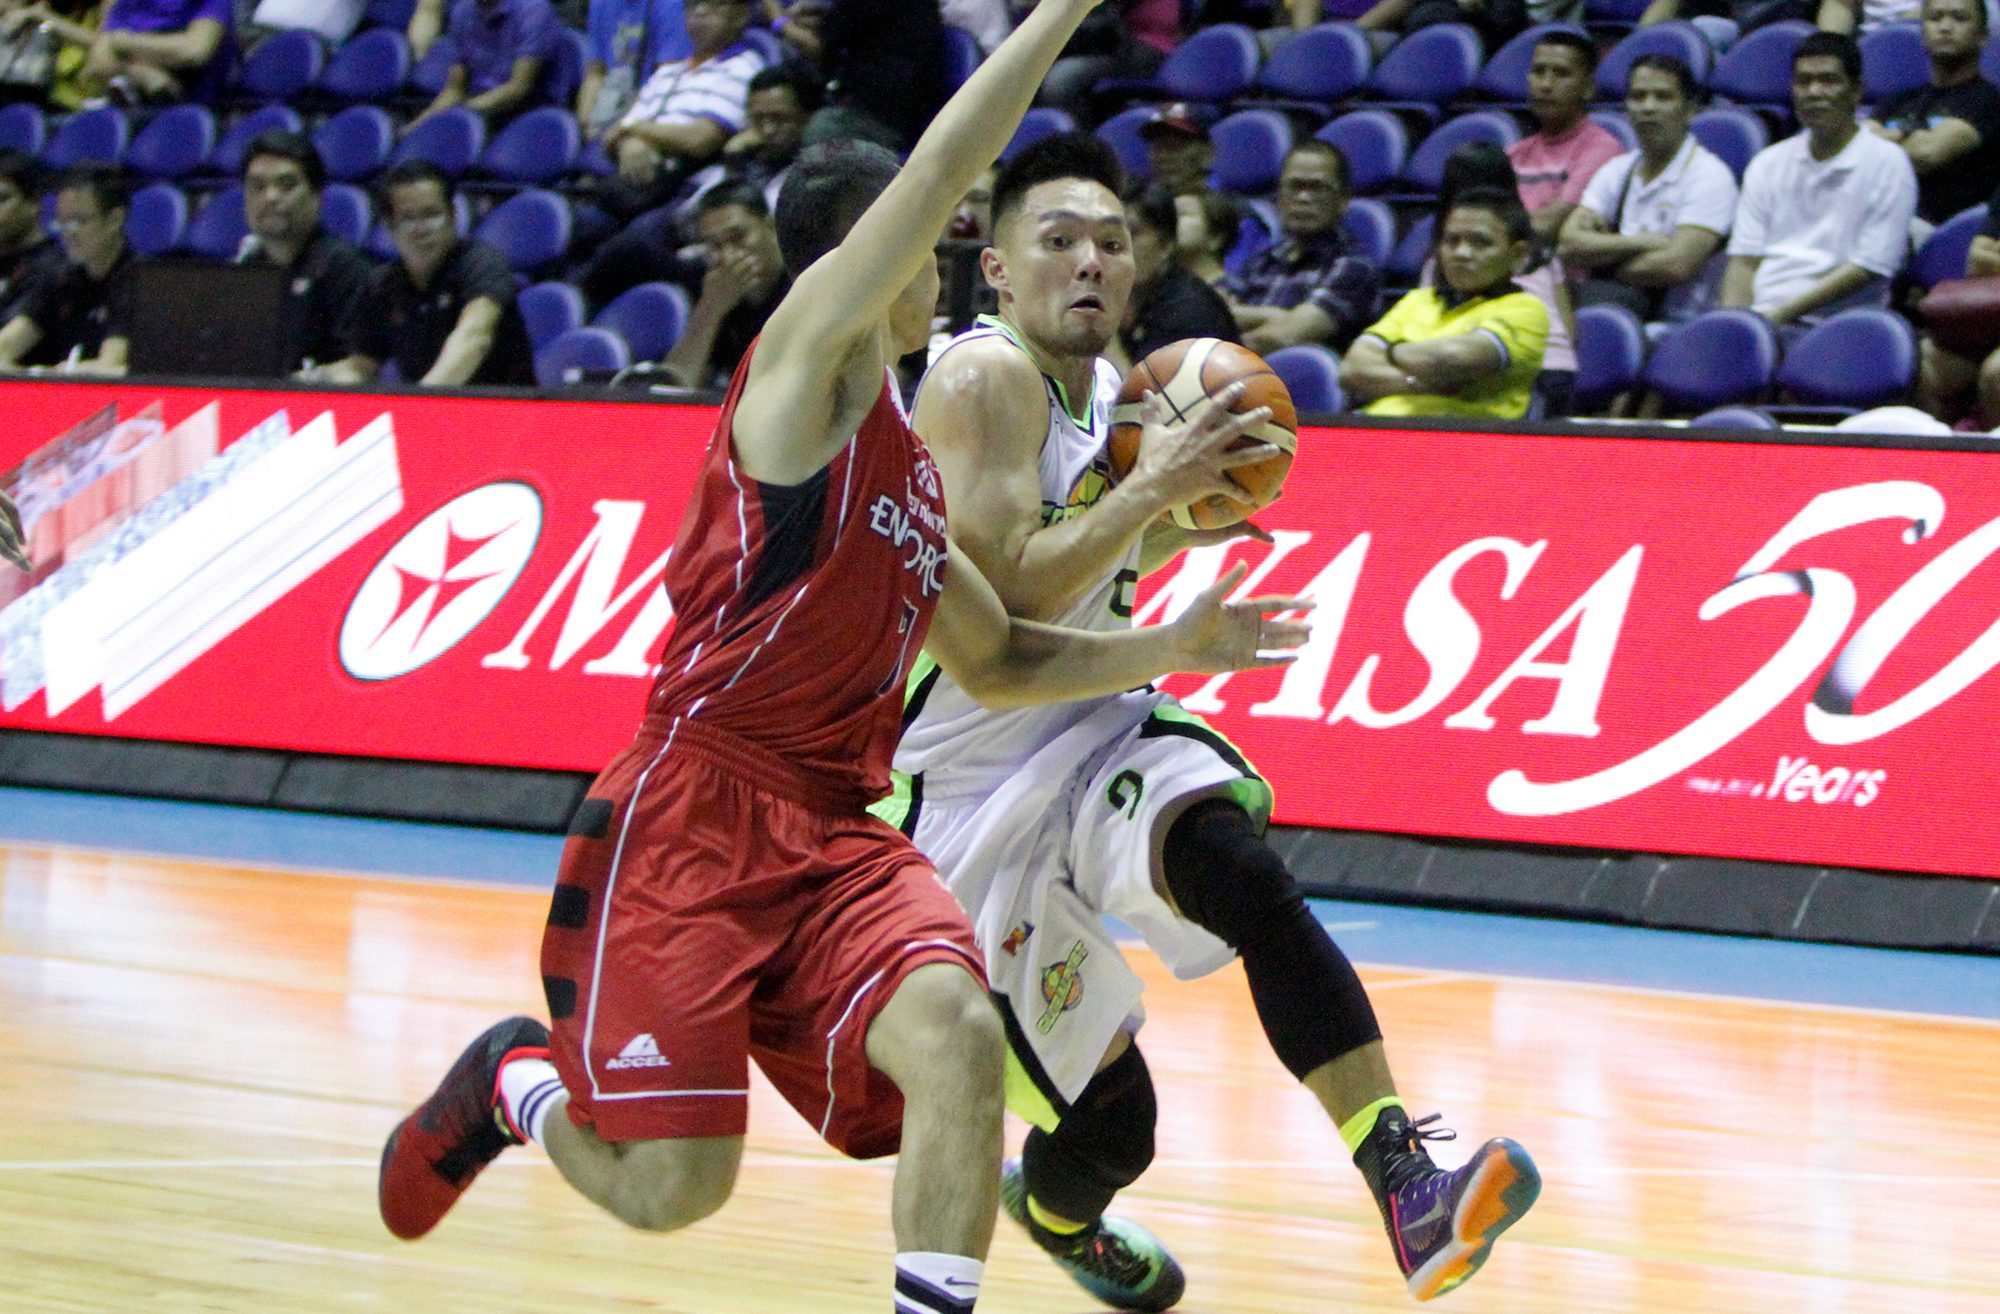 Yeo puzzled by benching, but respects Globalport decision